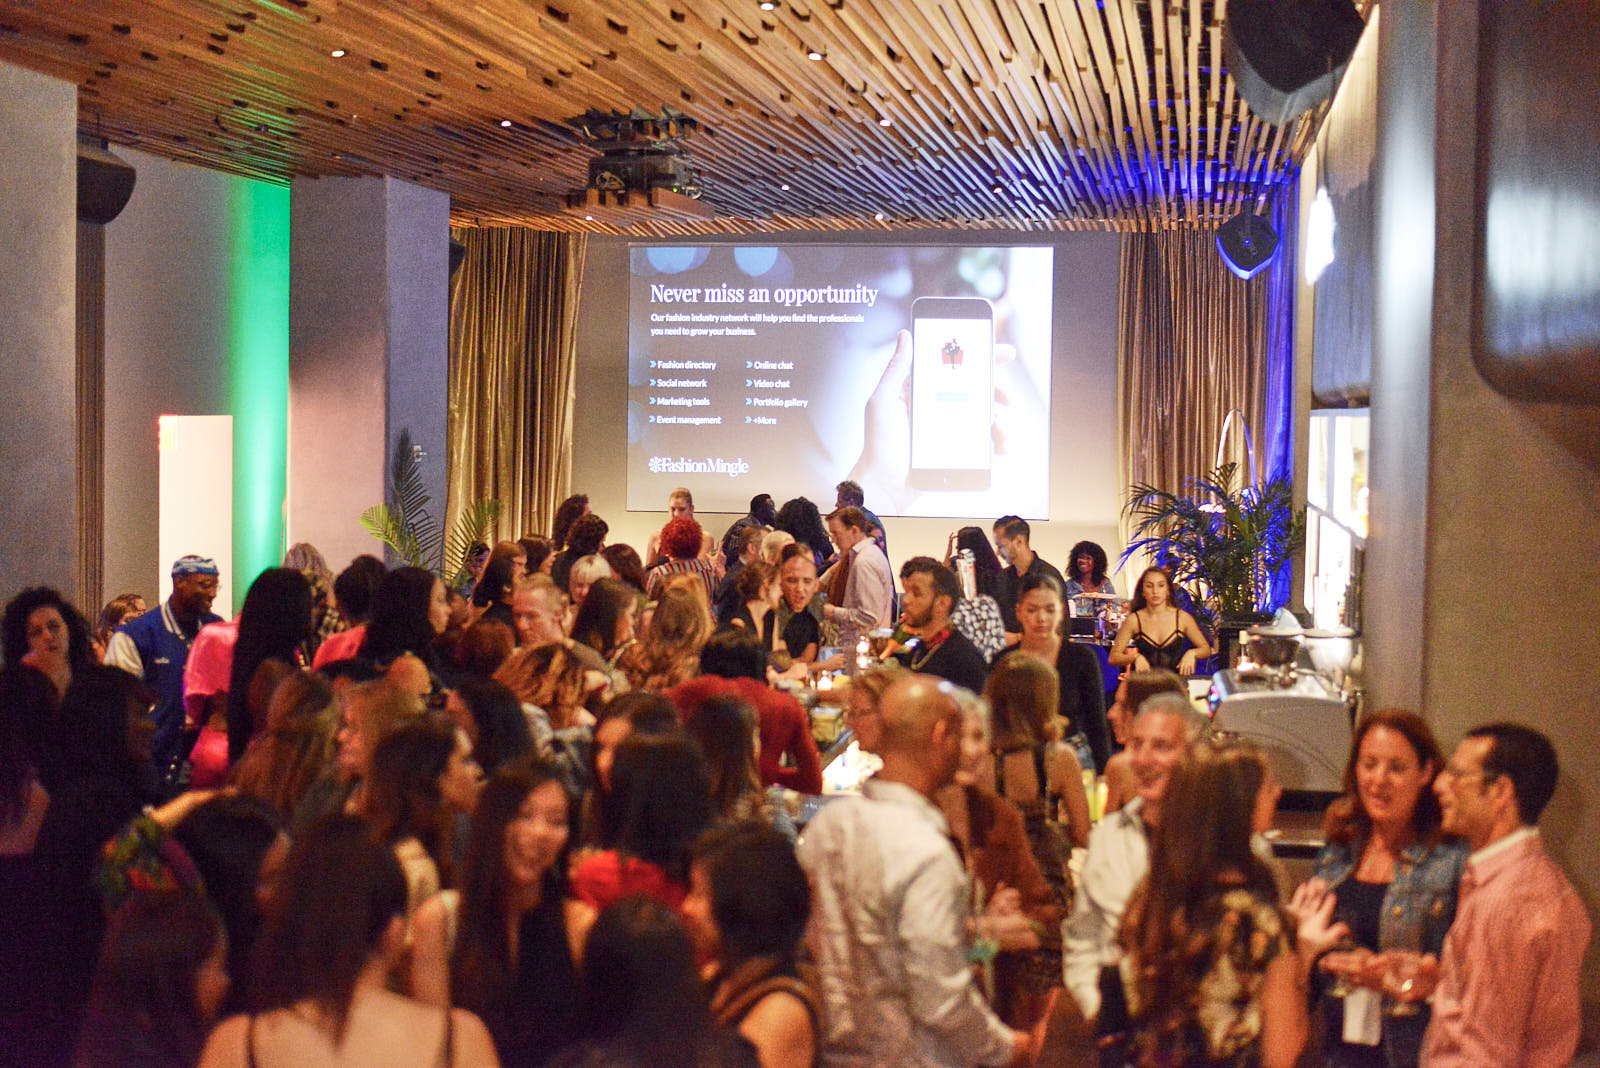 NYFW Networking Party hosted by Fashion Mingle every Sunday night of New York Fashion Week